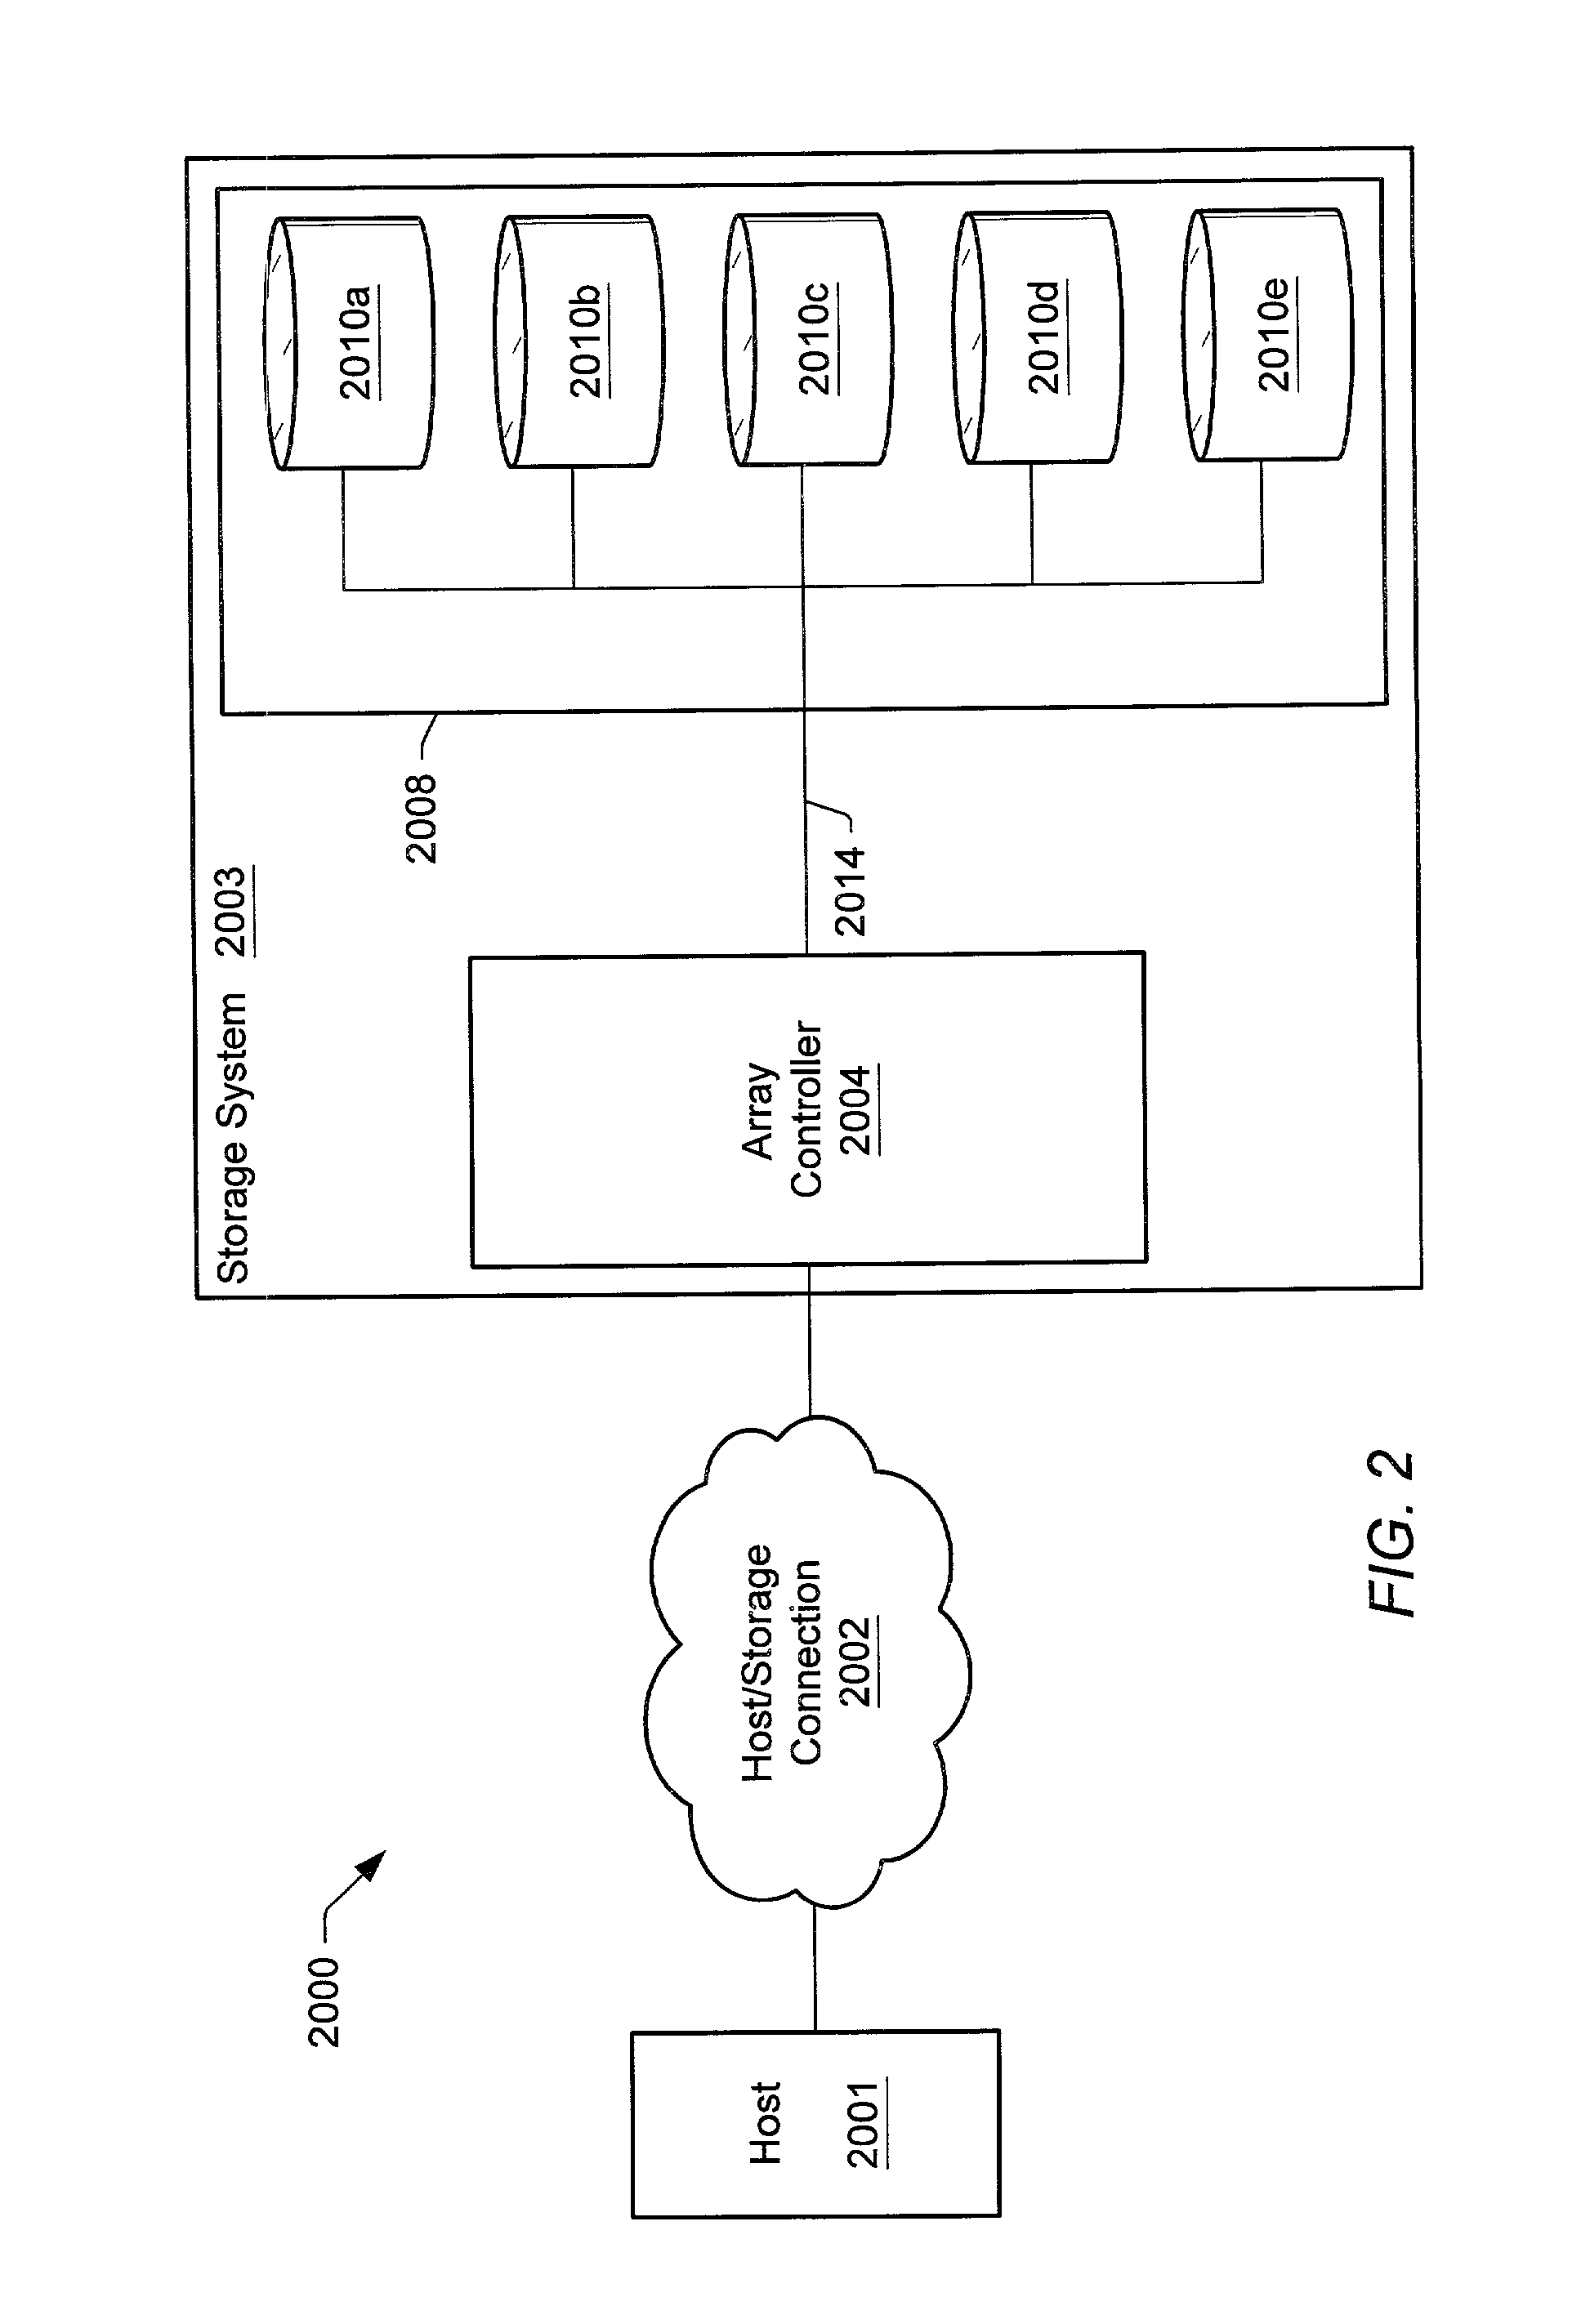 System and method for verifying error detection/correction logic